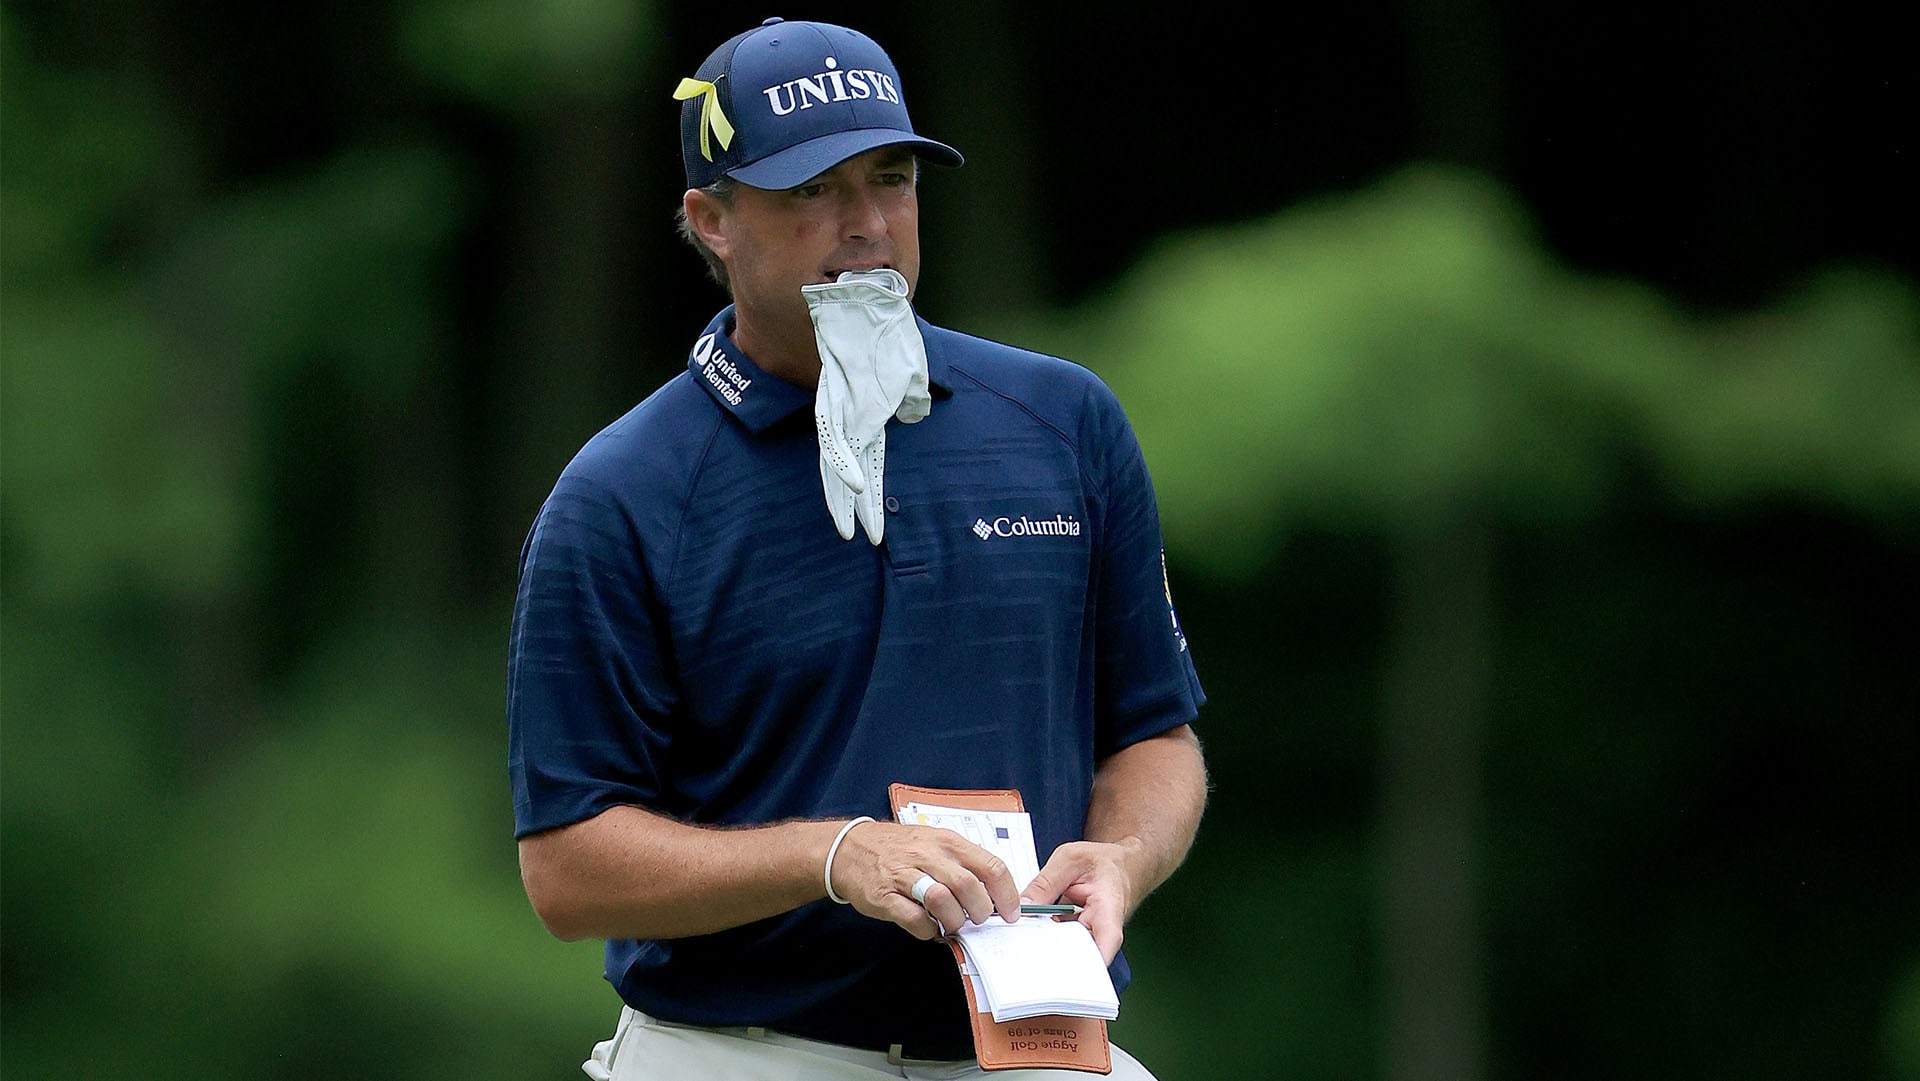 Watch Ryan Palmer plays bunker shot with putter at BMW Championship